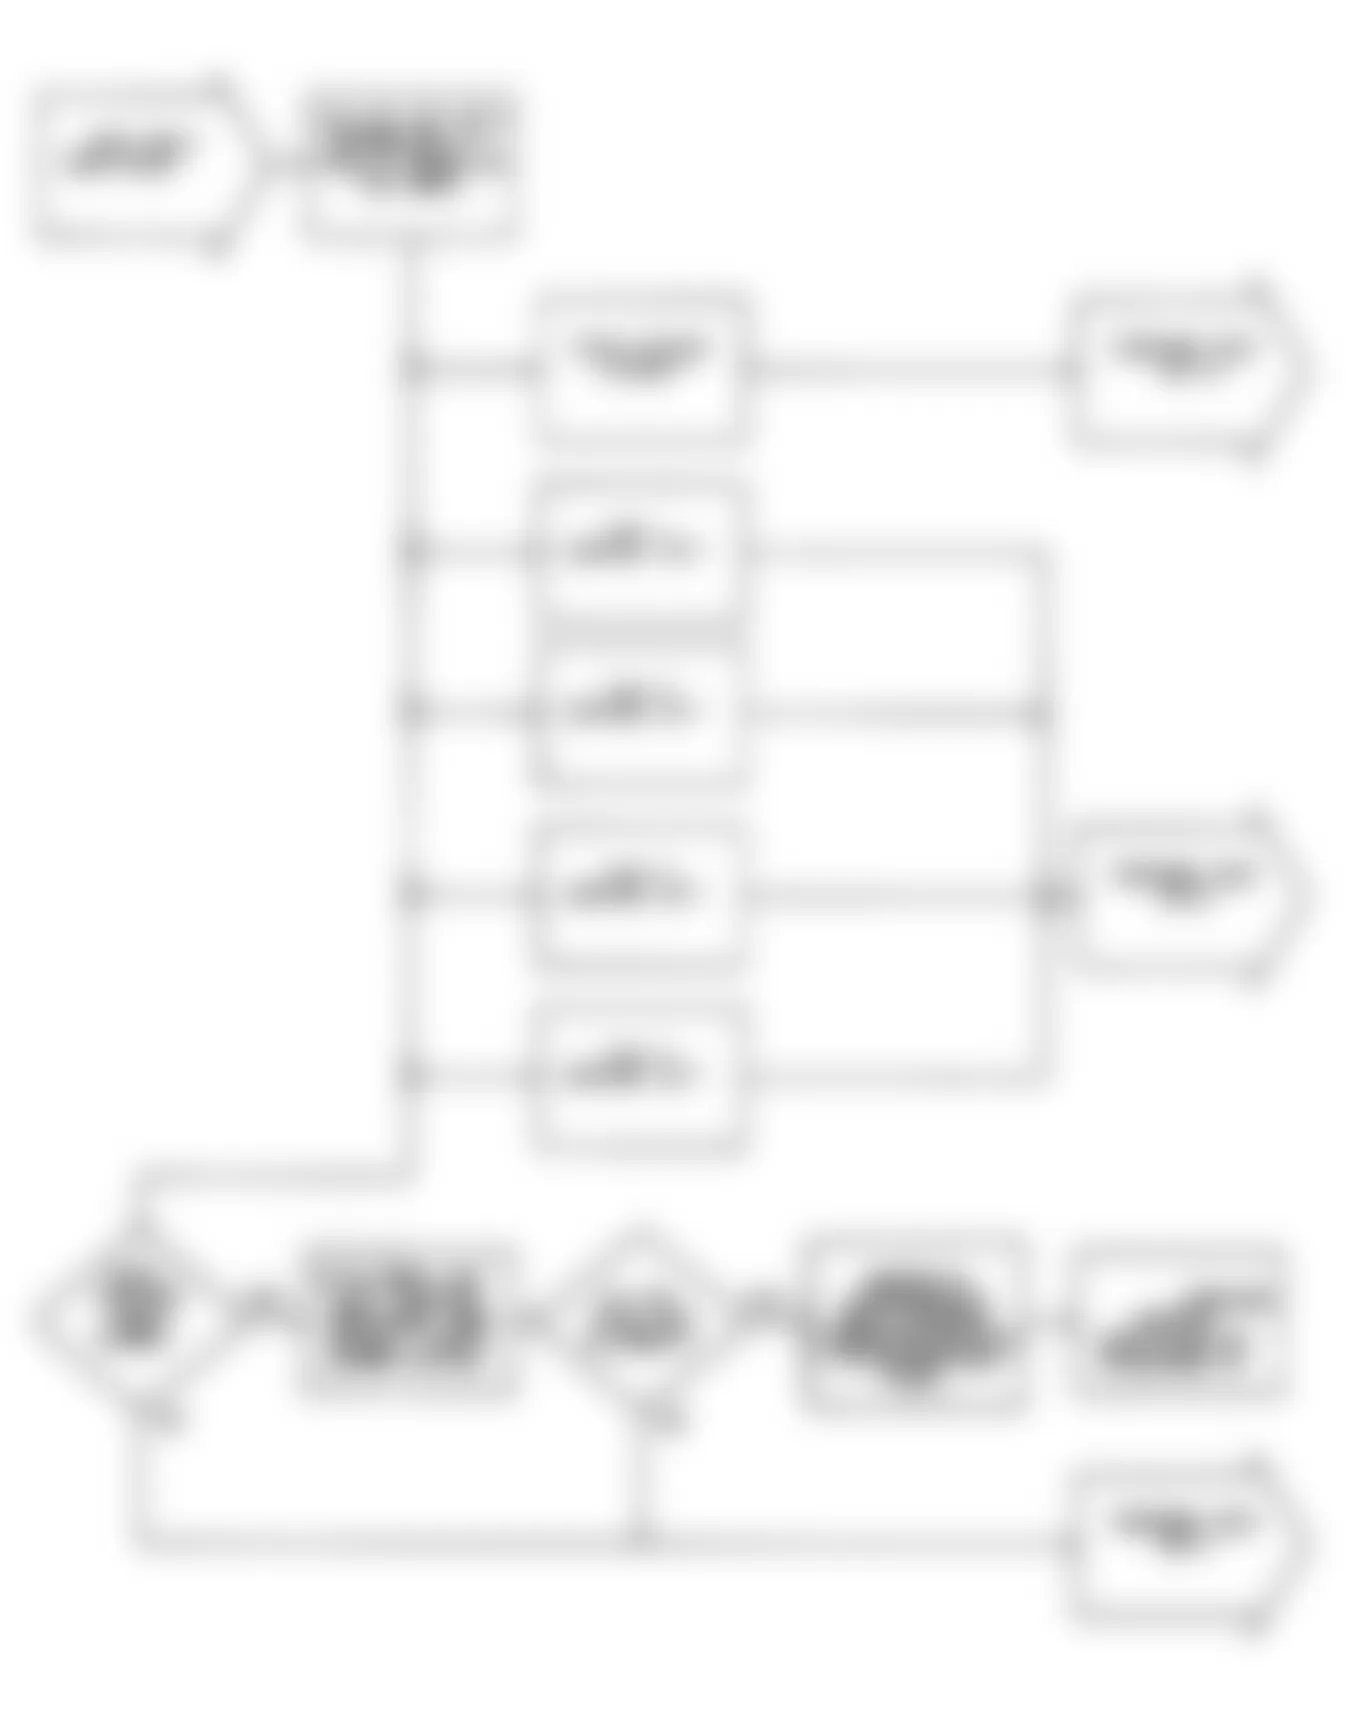 Chrysler LeBaron GTC 1990 - Component Locations -  NS-2: Flow Chart (2 of 2)